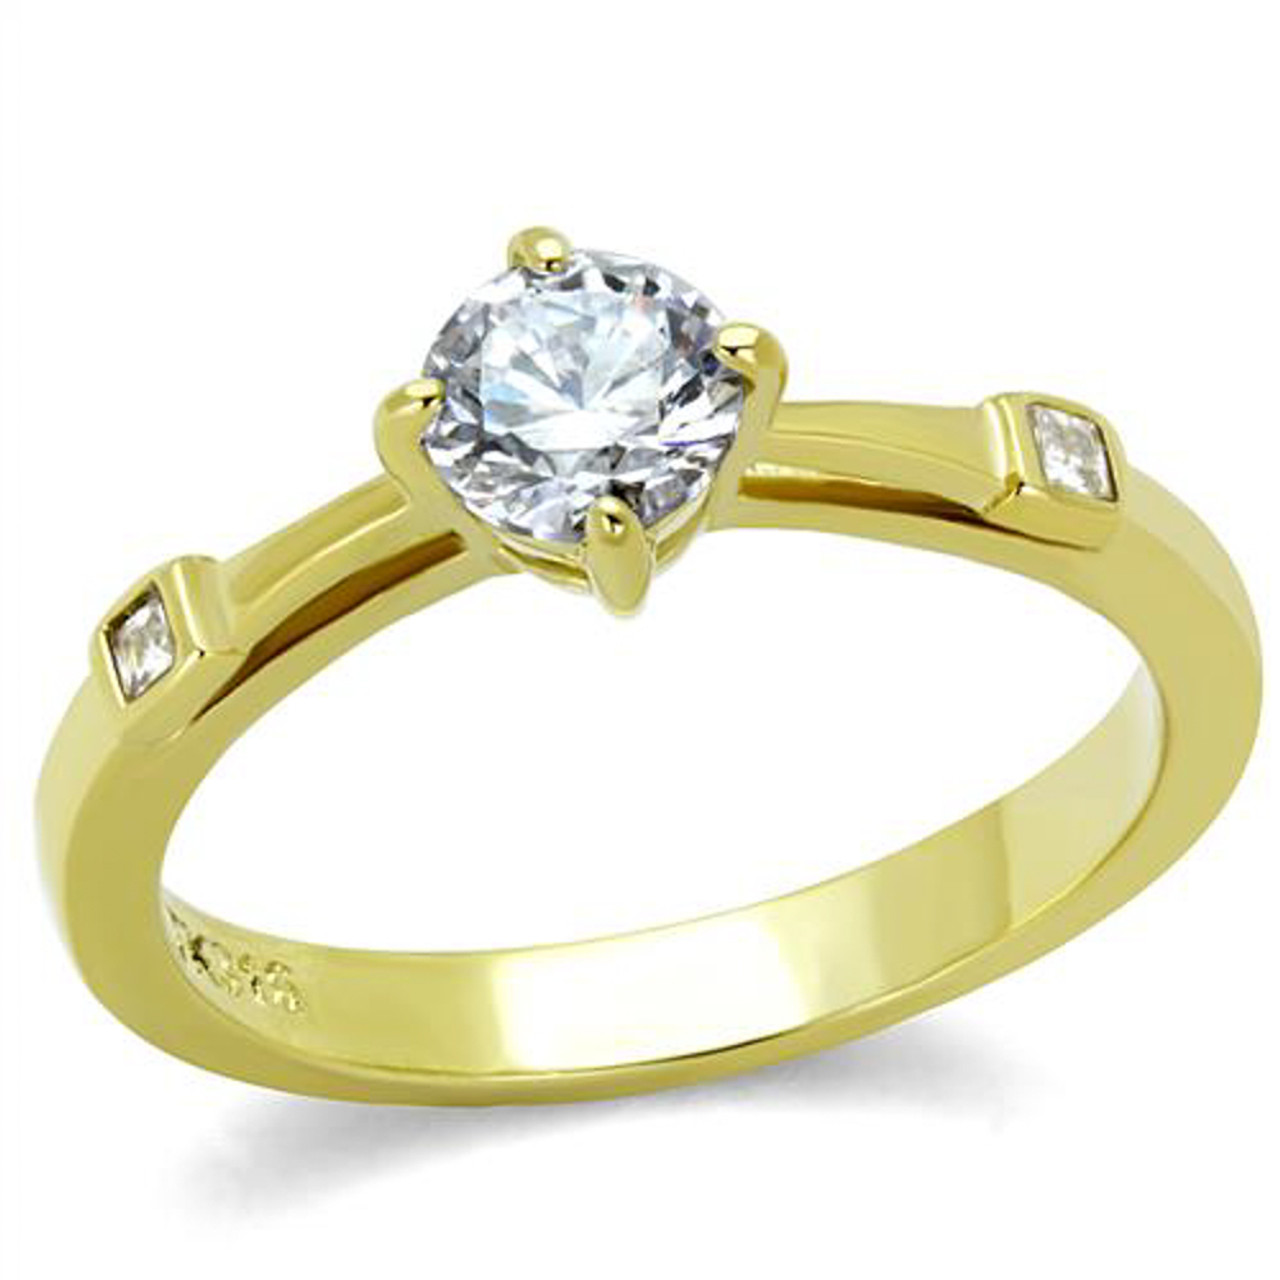 ARTK2170 Stainless Steel .69Ct Round Cut Cz 14K Gold Plated Engagement ...